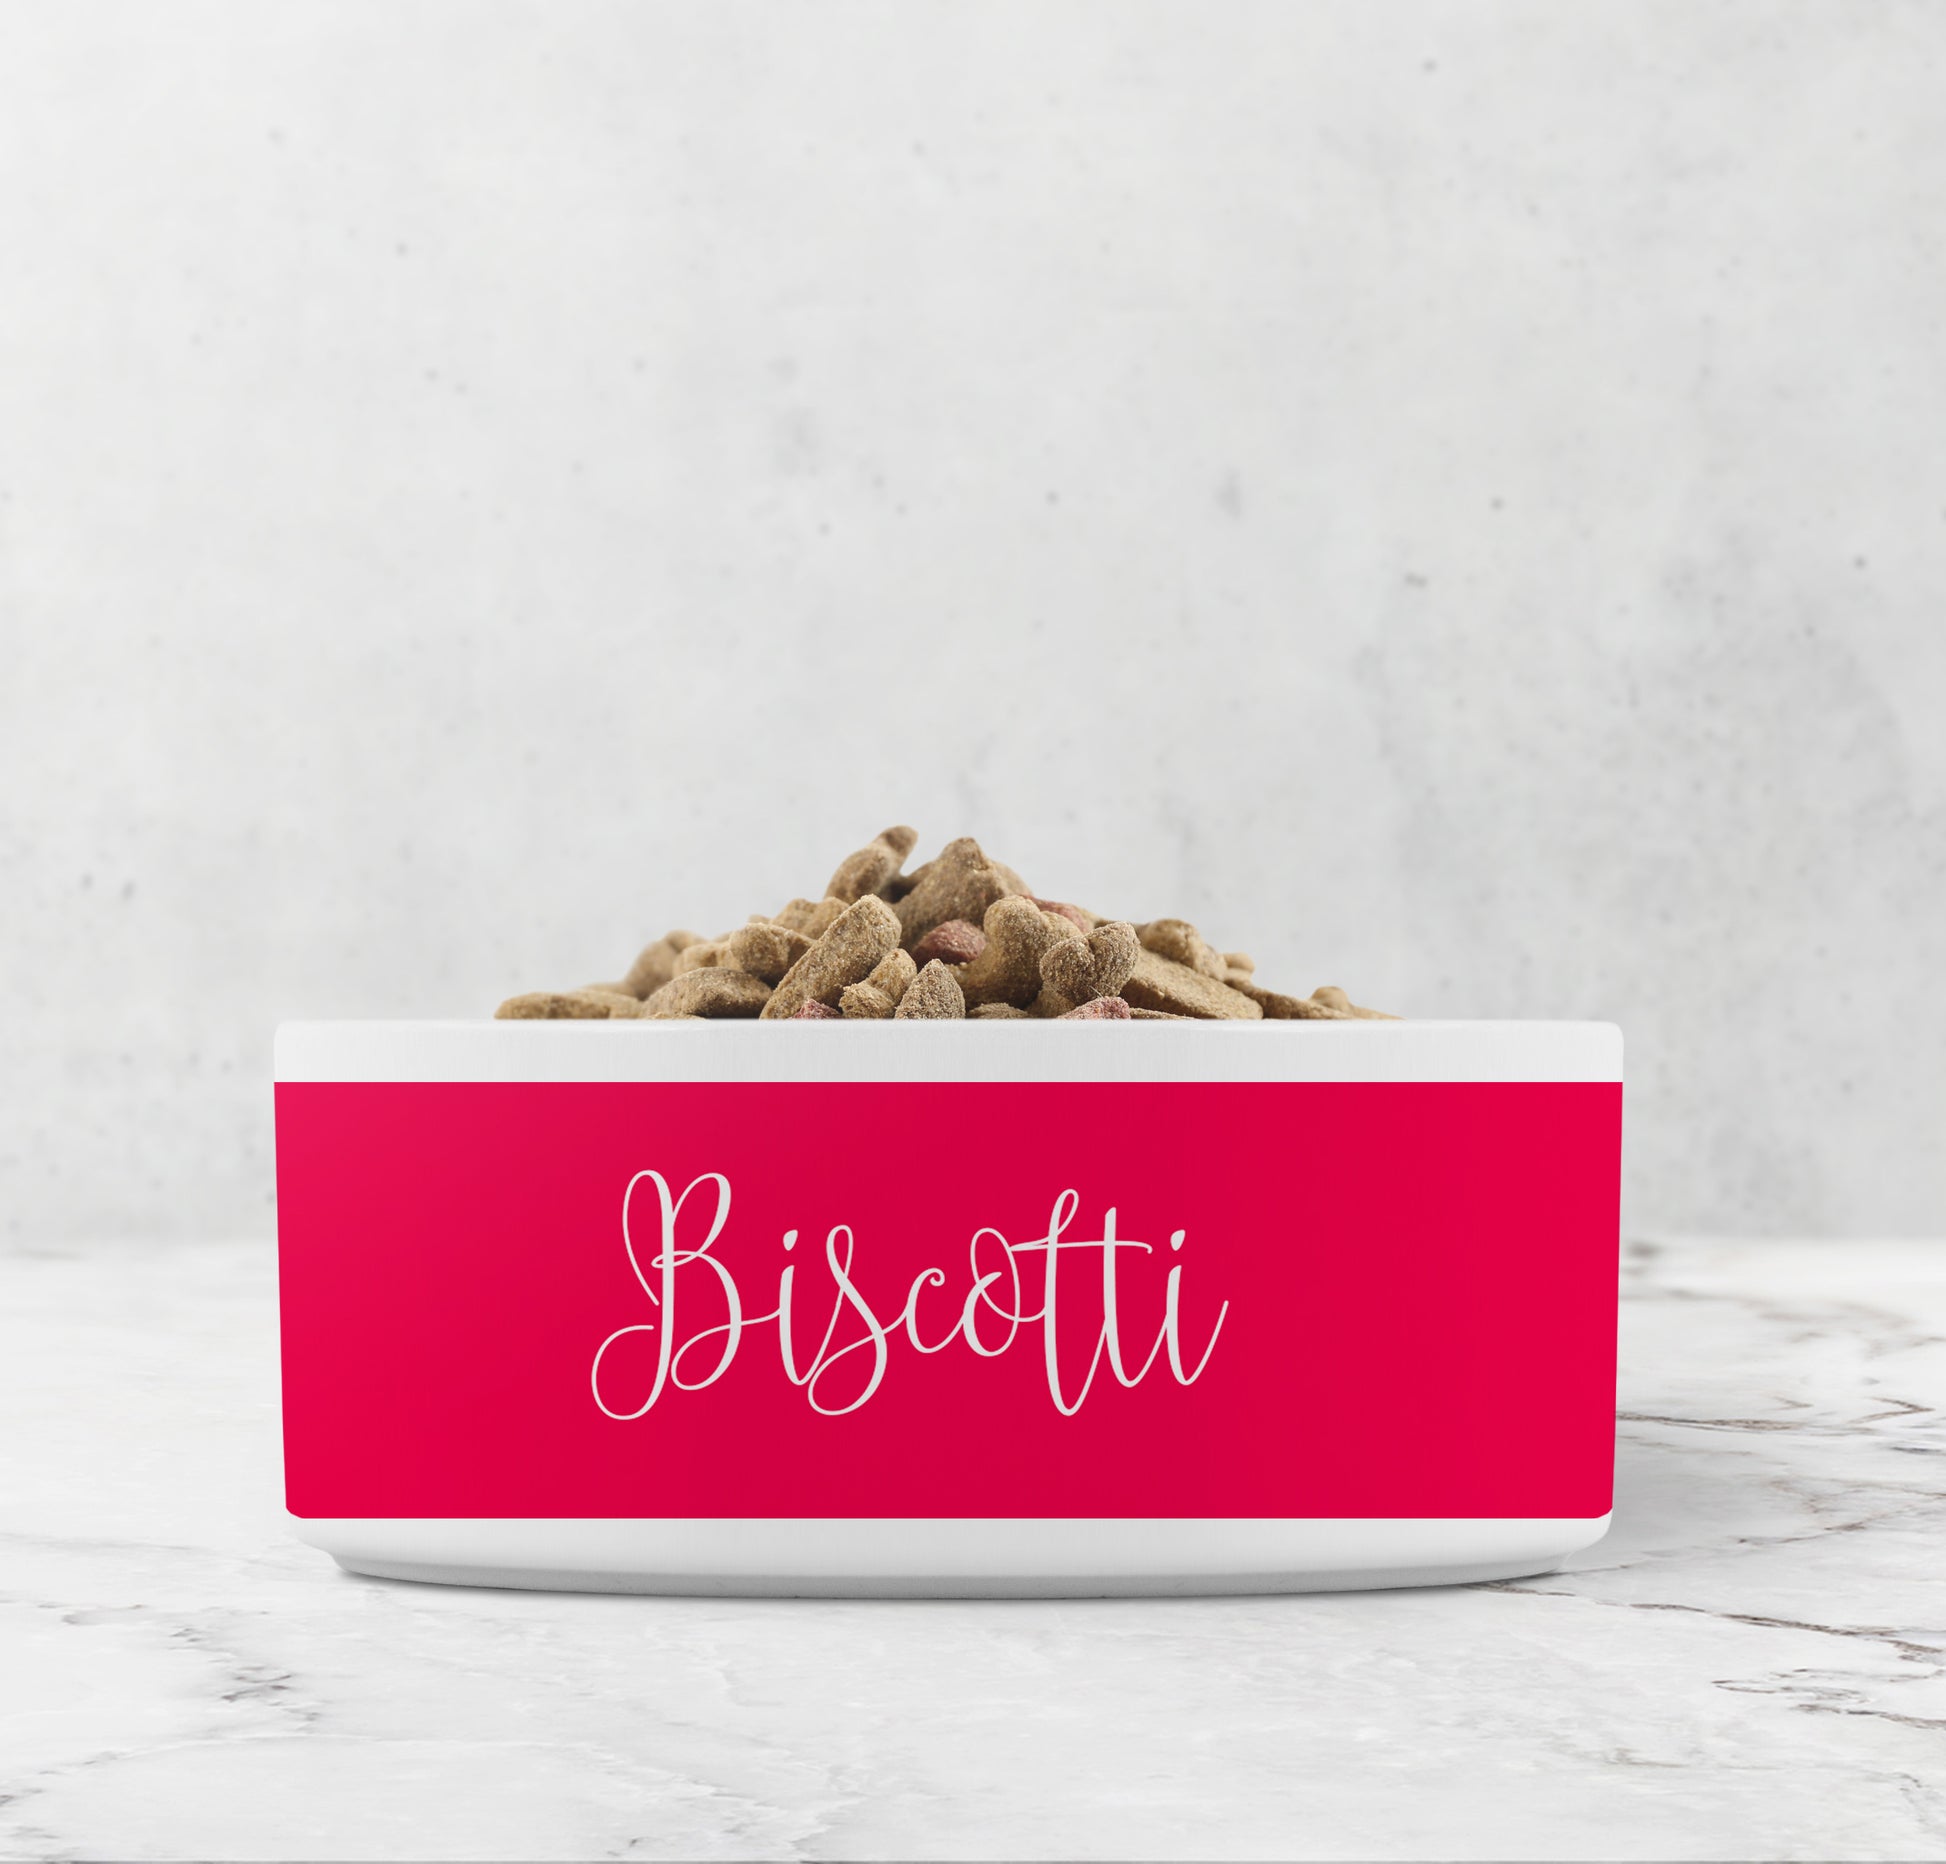 Personalized Pet Dish in hot pink fuchsia and white.